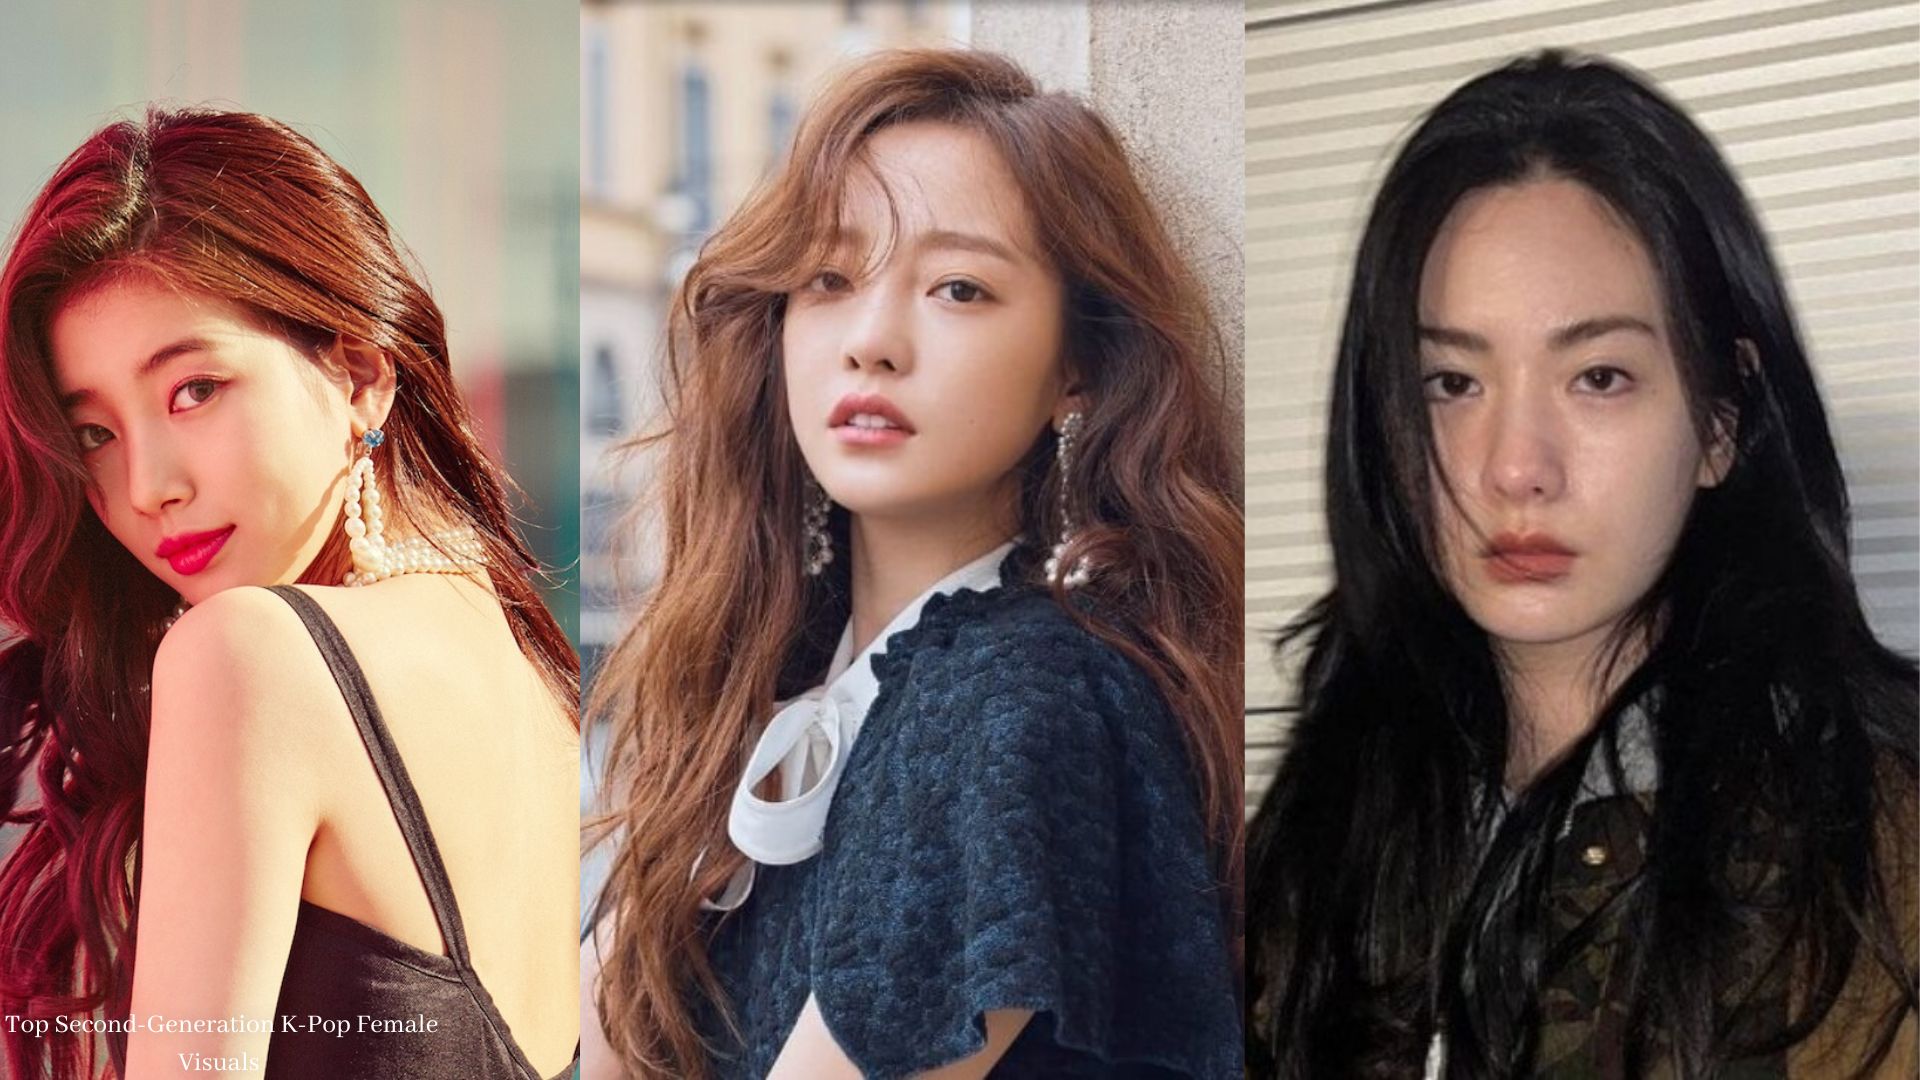 Top Second-Generation K-Pop Female Visuals – Know All About the Beauties